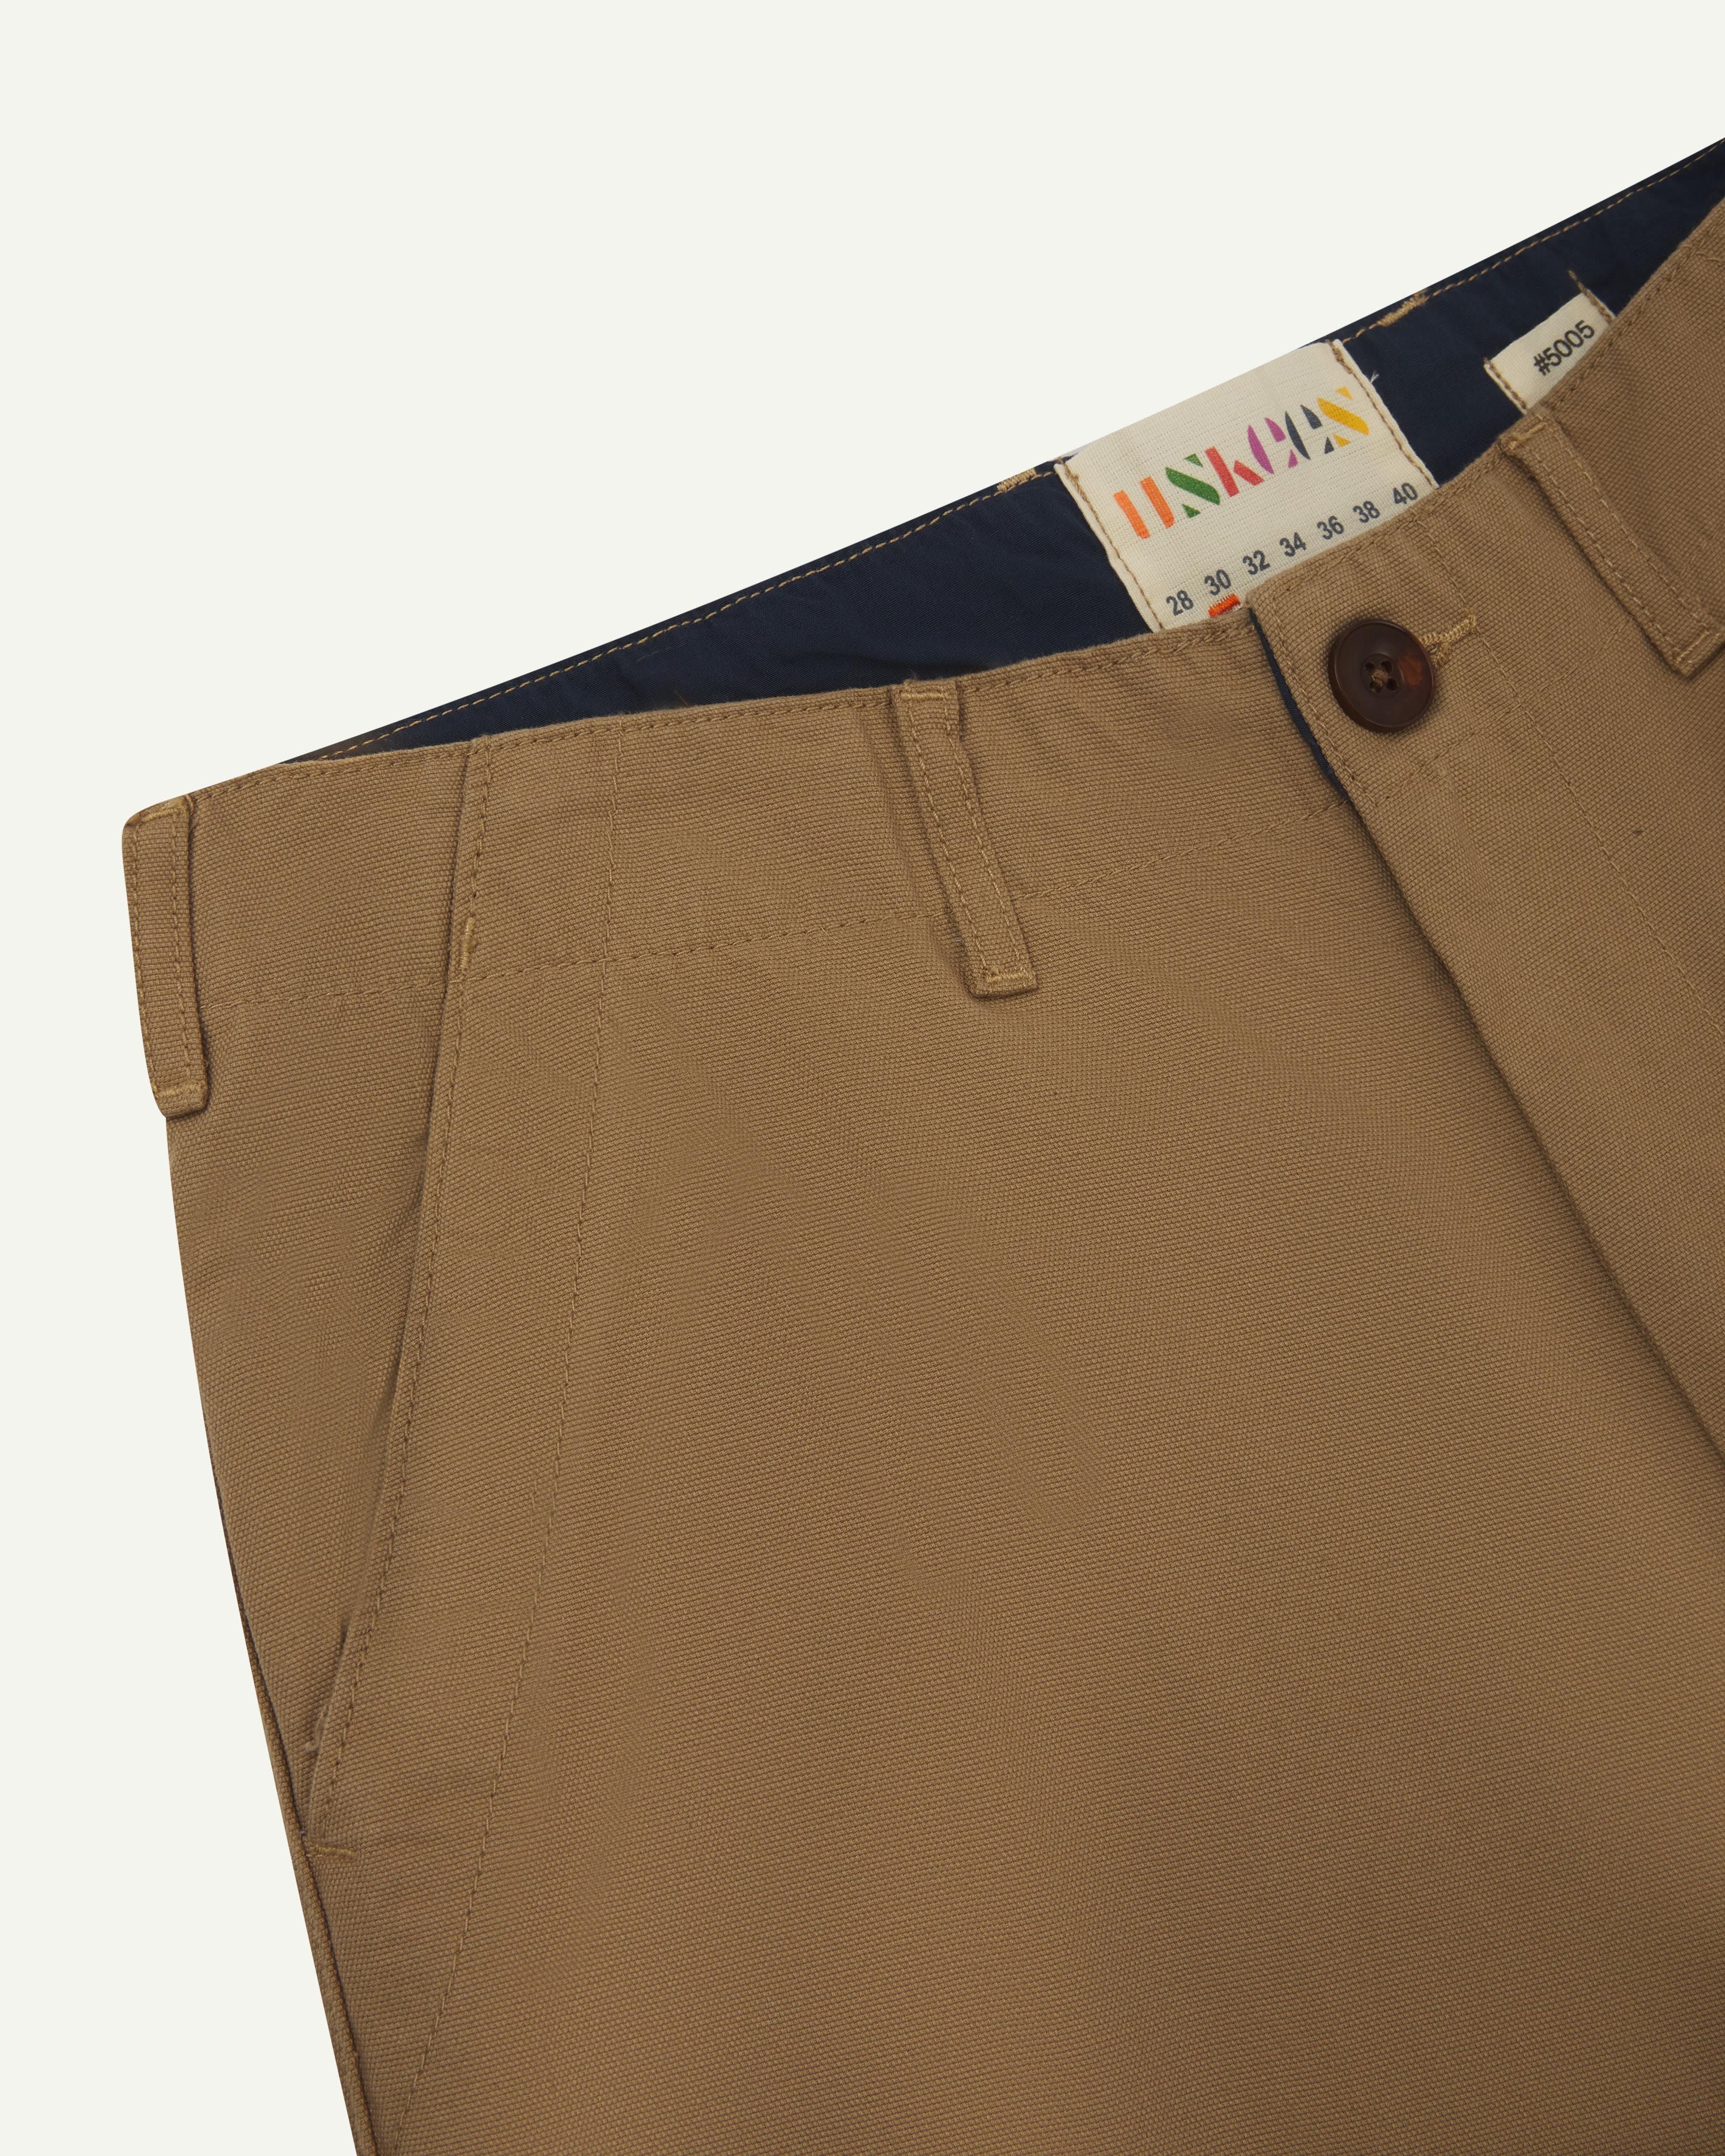 Front detail shot of #5005 Uskees men's organic cotton khaki casual trousers showing the lined waist band and size label.